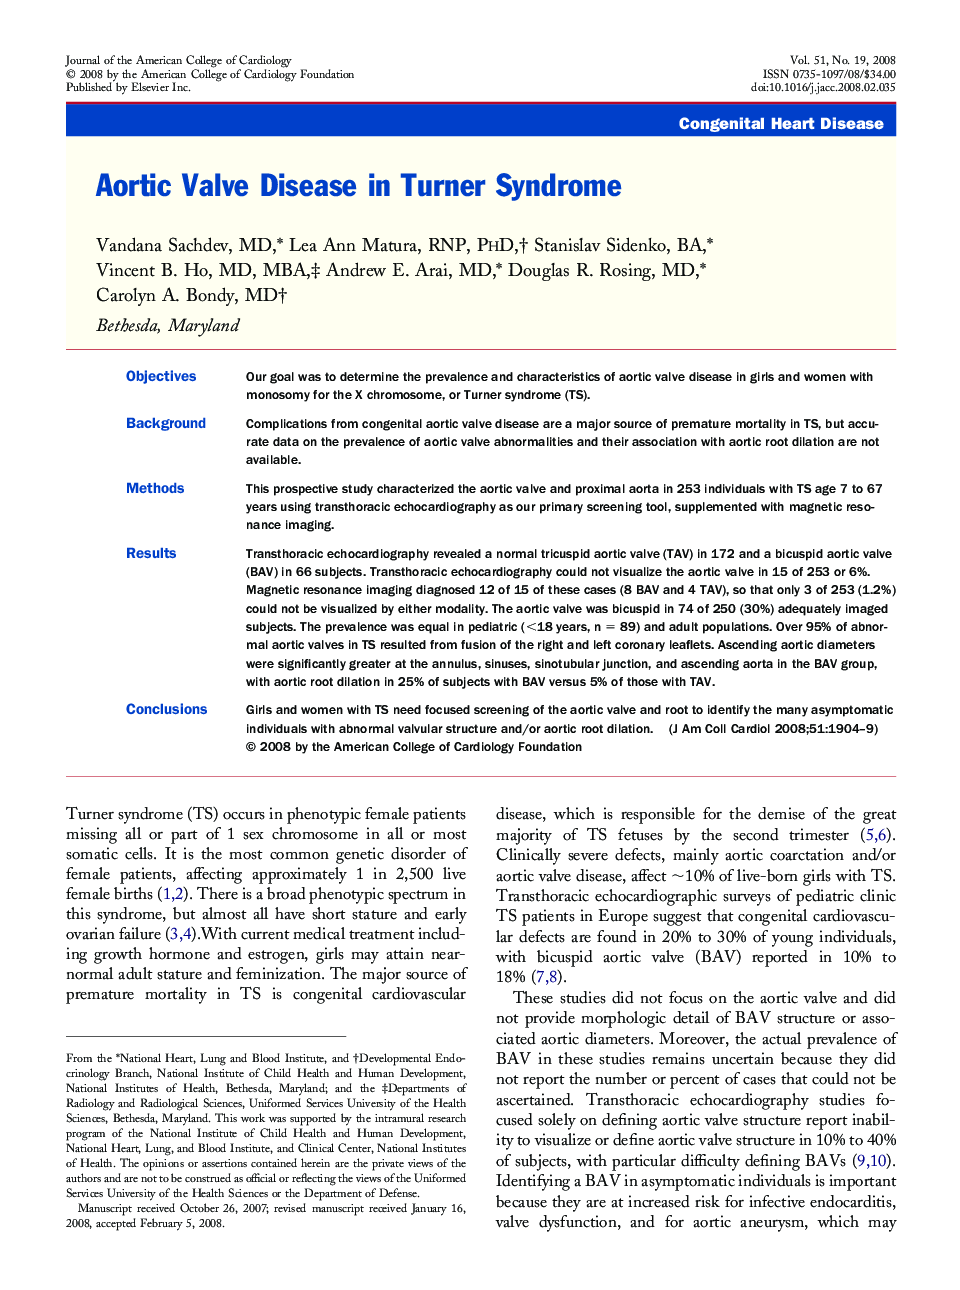 Aortic Valve Disease in Turner Syndrome 